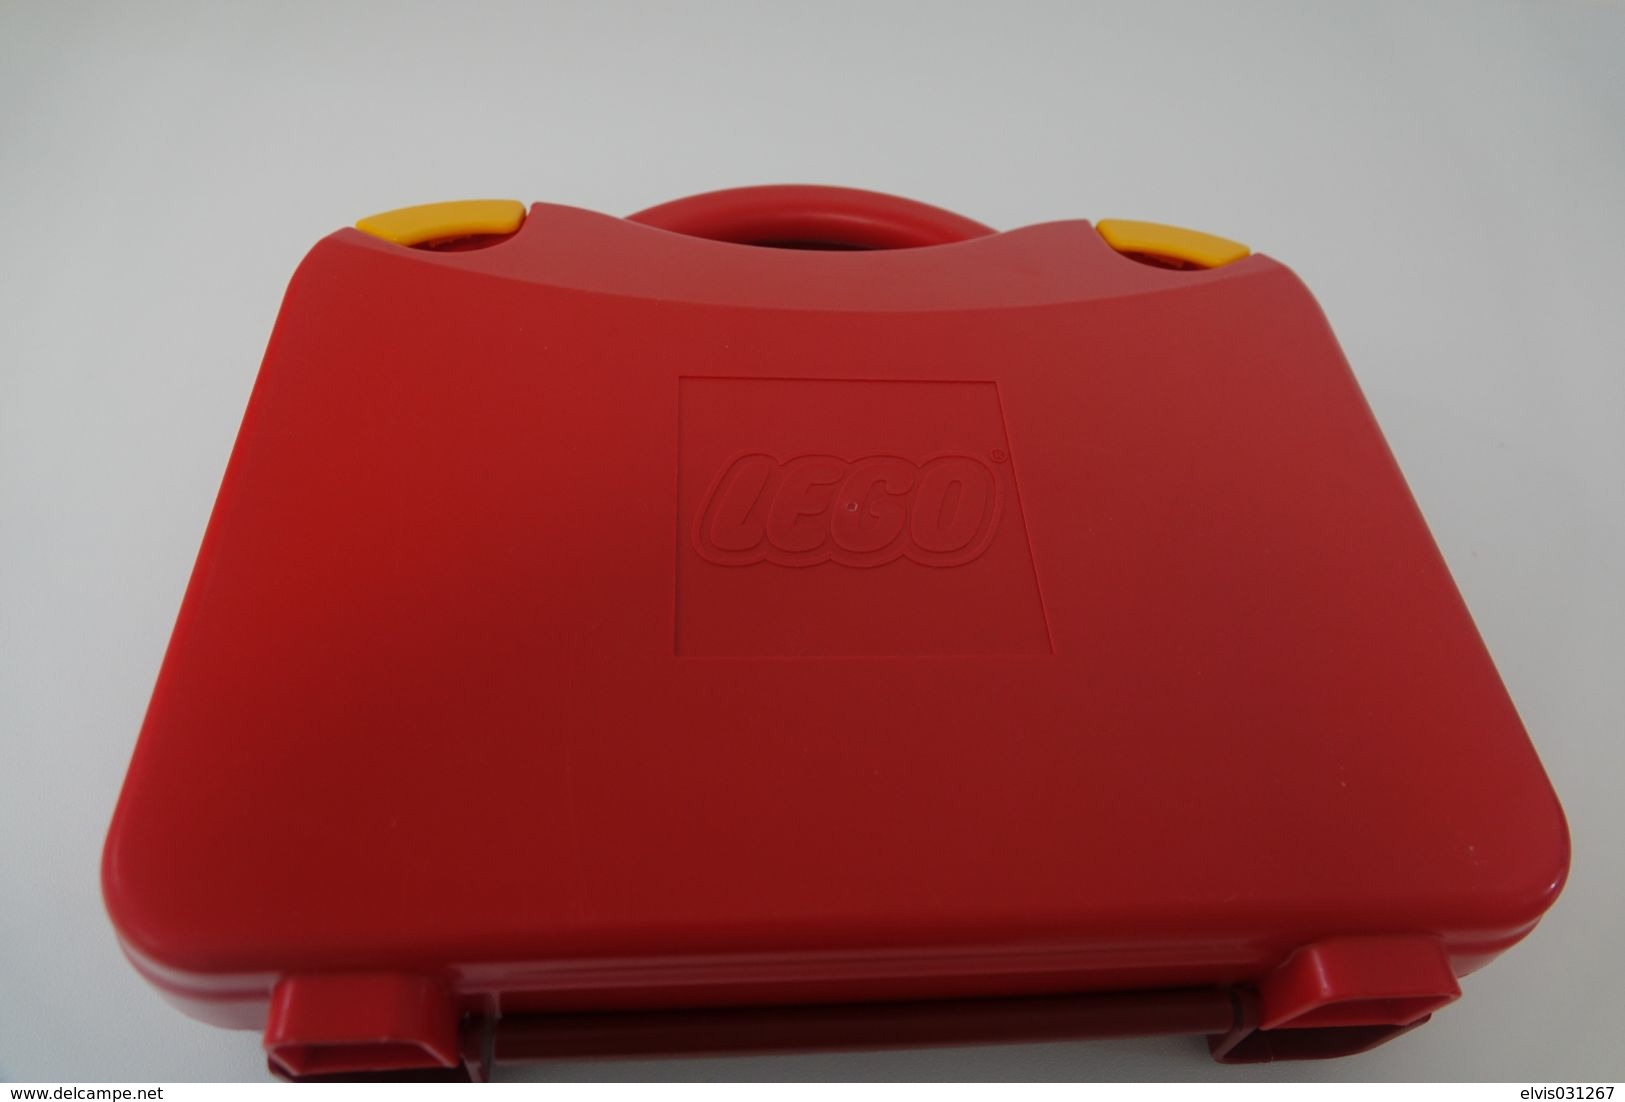 LEGO - 759528c03 - Storage Case With Rounded Corners And Red Lid, Yellow Latches - Original Lego 2015 - Vintage - Catalogs